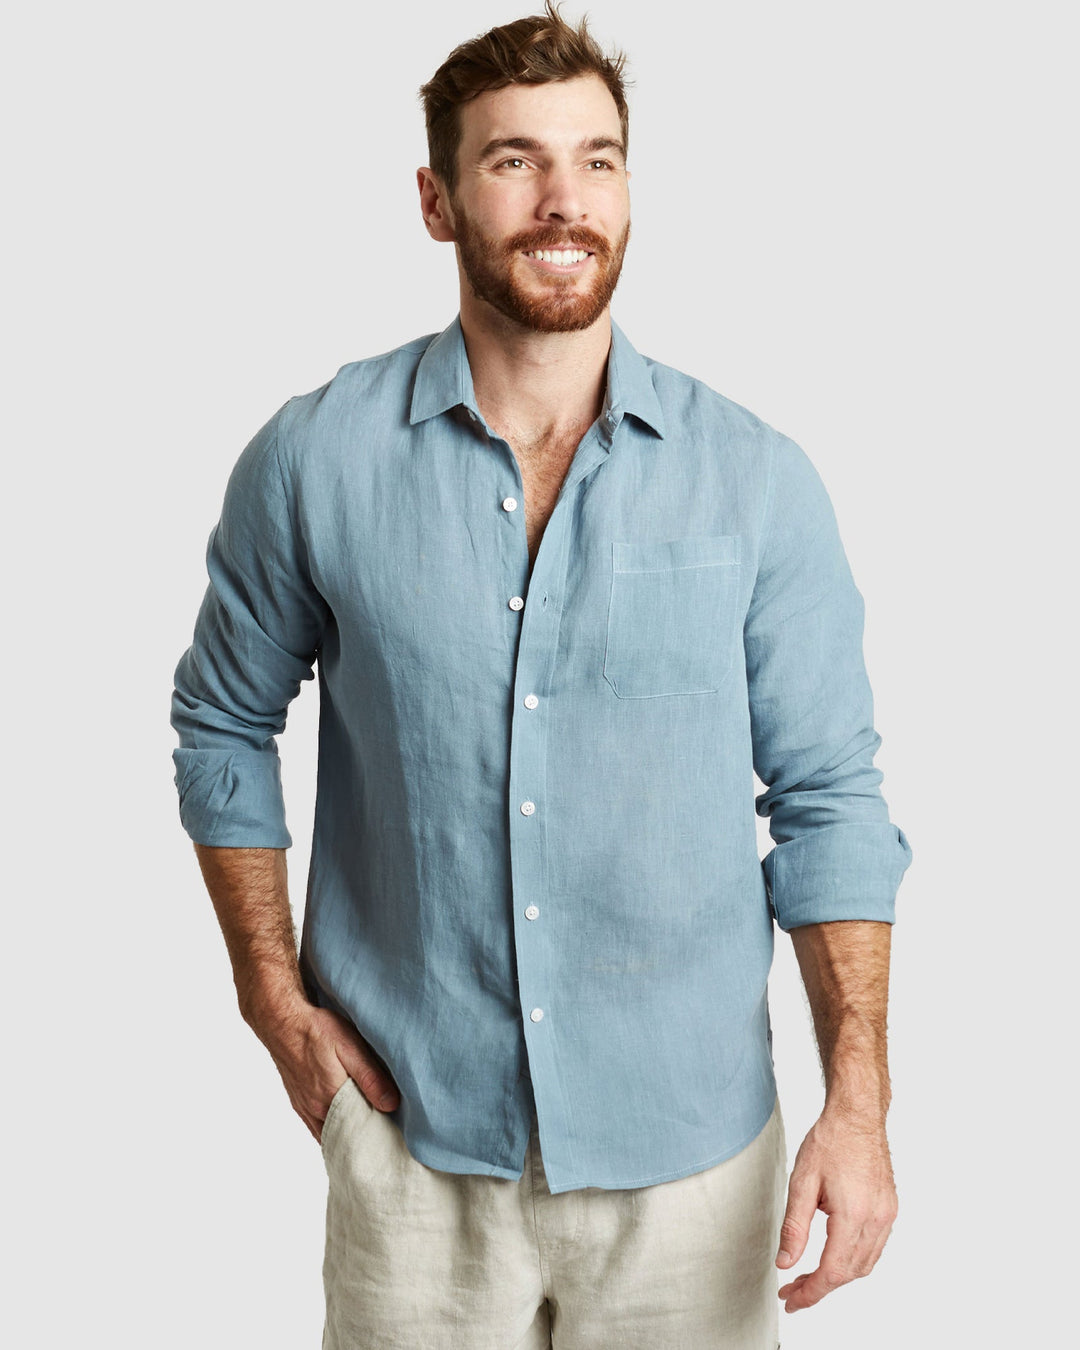 Men's Loose Linen Shirt︱ - In the Middle Tulum